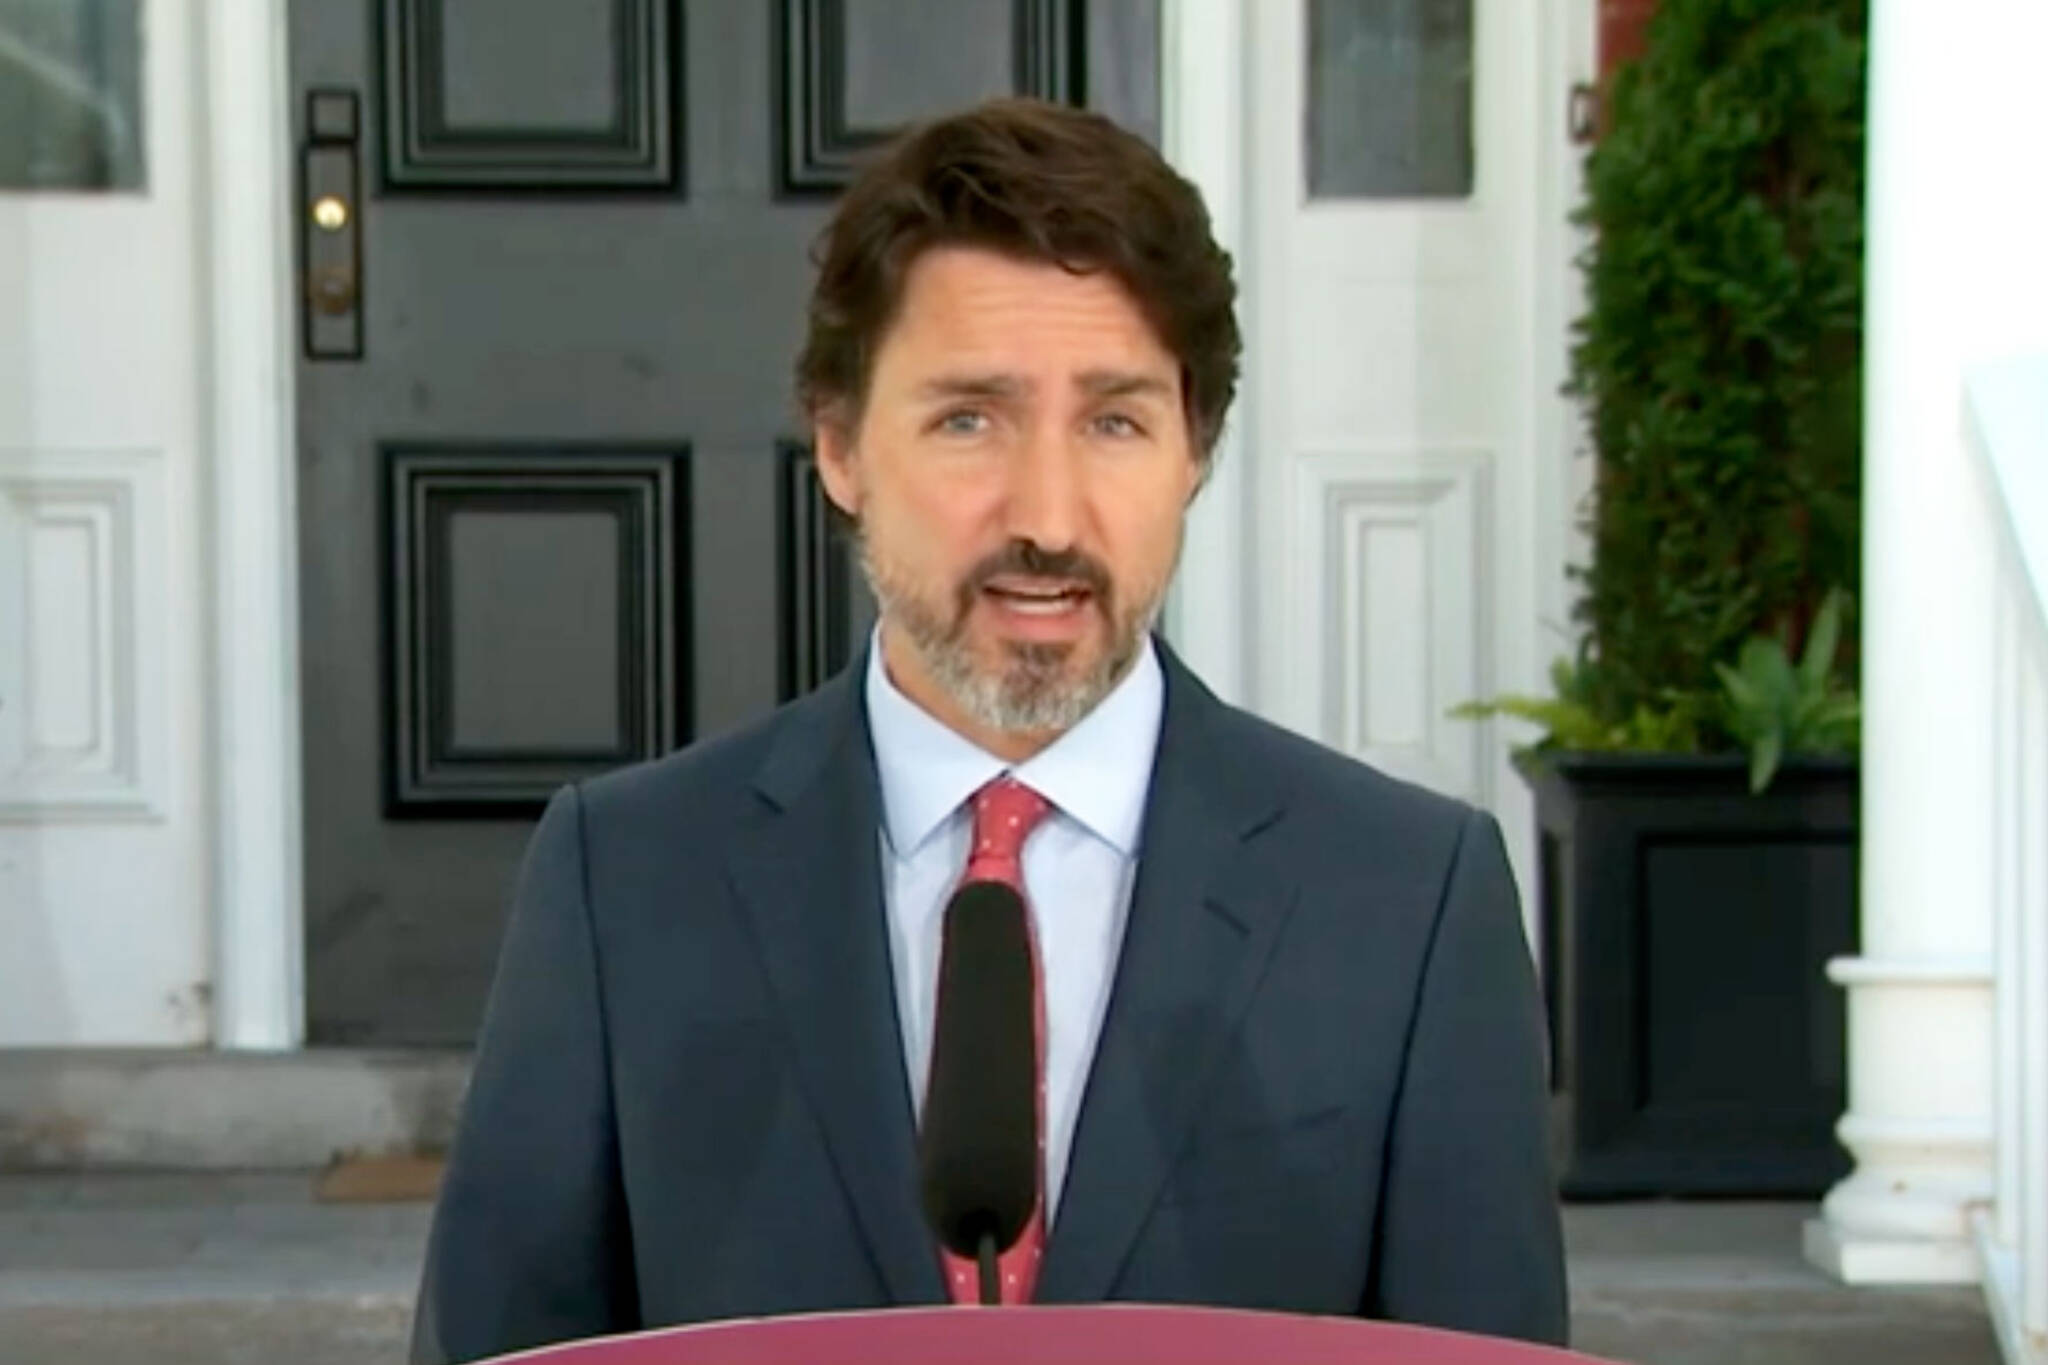 Justin Trudeau just surprised Canada with his new haircut